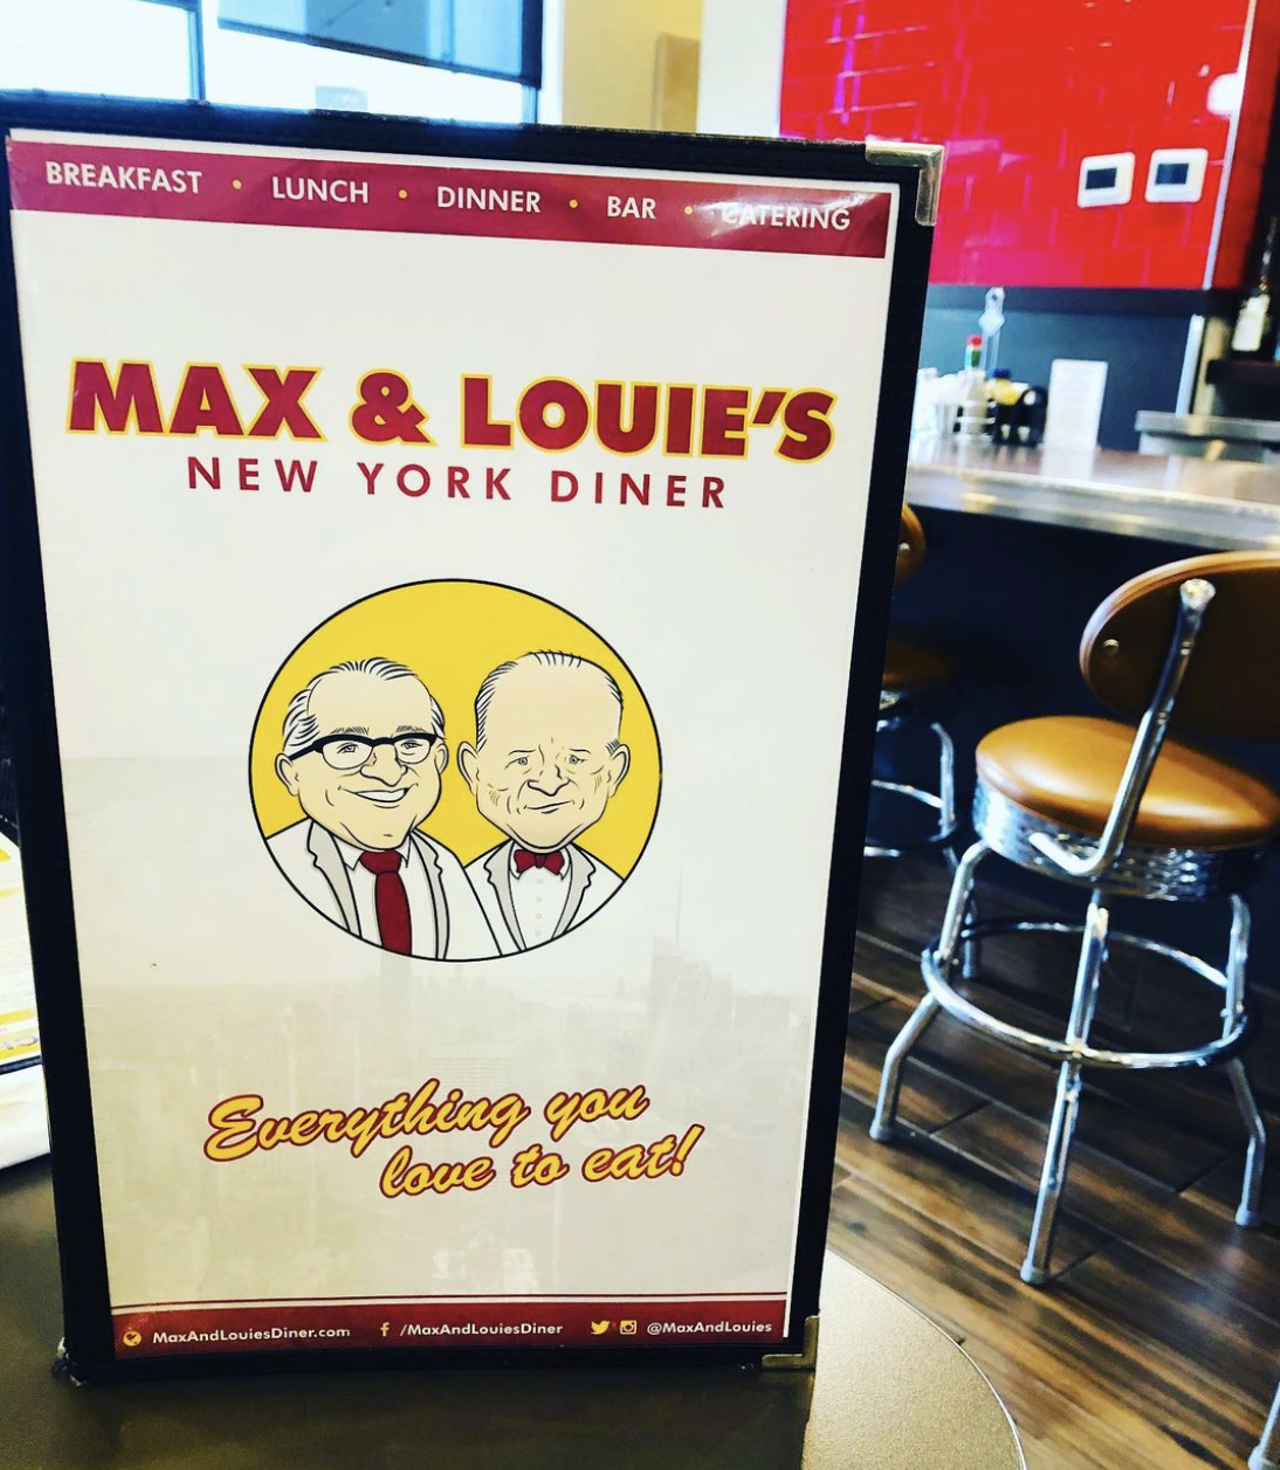 Max & Louie's New York Diner
226 W Bitters Rd Suite 126, (210) 483-7600, maxandlouiesdiner.com
Challah bread stuffing? Yes, please! Max & Louie’s is offering up a killer feast for five to six people that includes roasted turkey, sides and a dessert for uner $205. Order by November 18 for pickup on the 24.  
Photo via Instagram / airingmylaundry